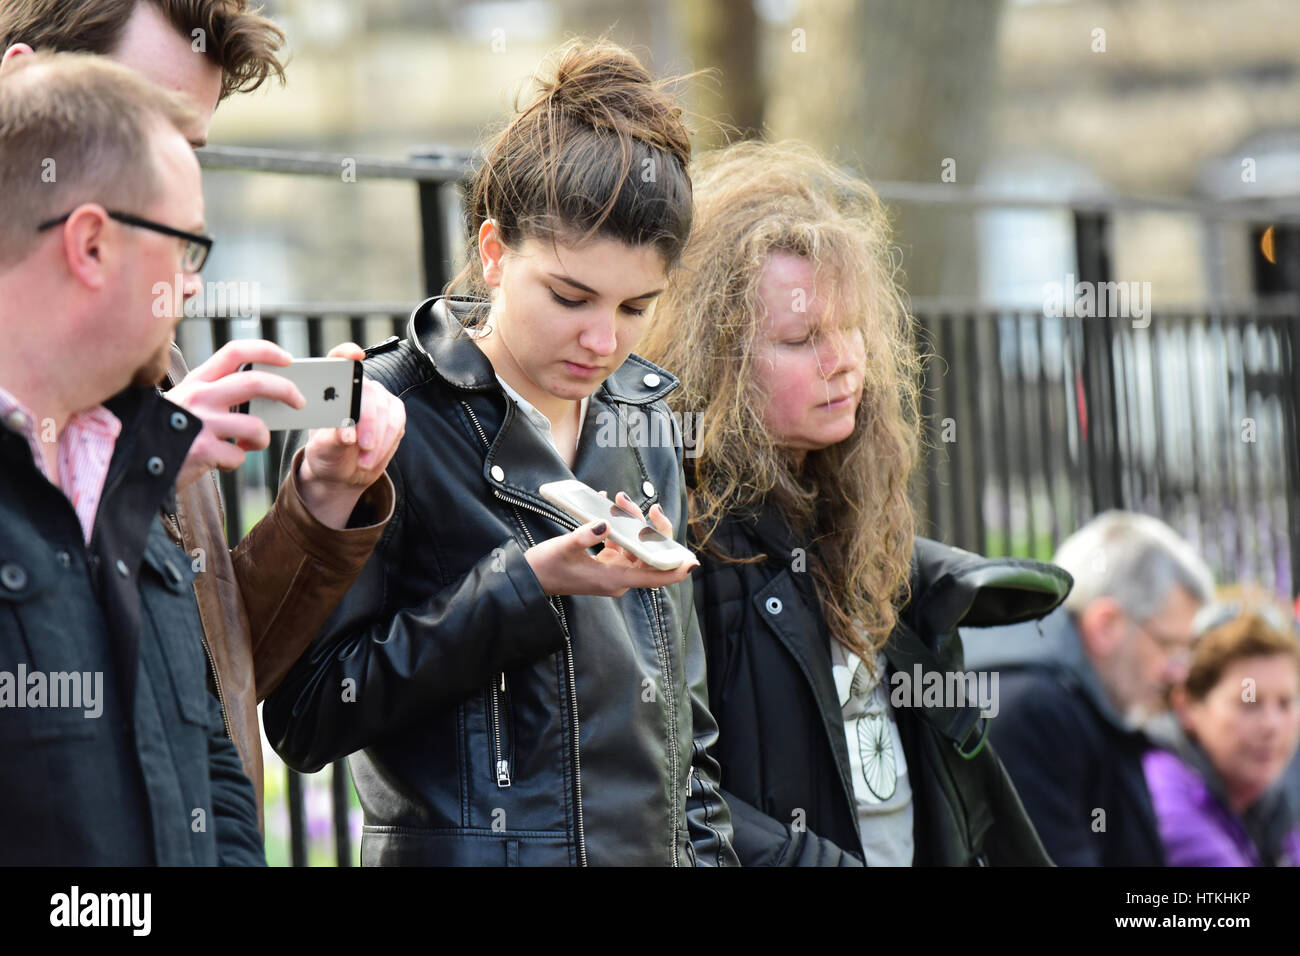 Edinburgh, Scotland, UK. 13th Mar, 2017. A small group of onlookers outside Bute House, the official residence of Scotland's First Minister Nicola Sturgeon, use their phones to follow Ms Sturgeon's announcement inside that she intends to seek Scottish Parliament and UK Government approval to call a second referendum on Scottish independence, Credit: Ken Jack/Alamy Live News Stock Photo